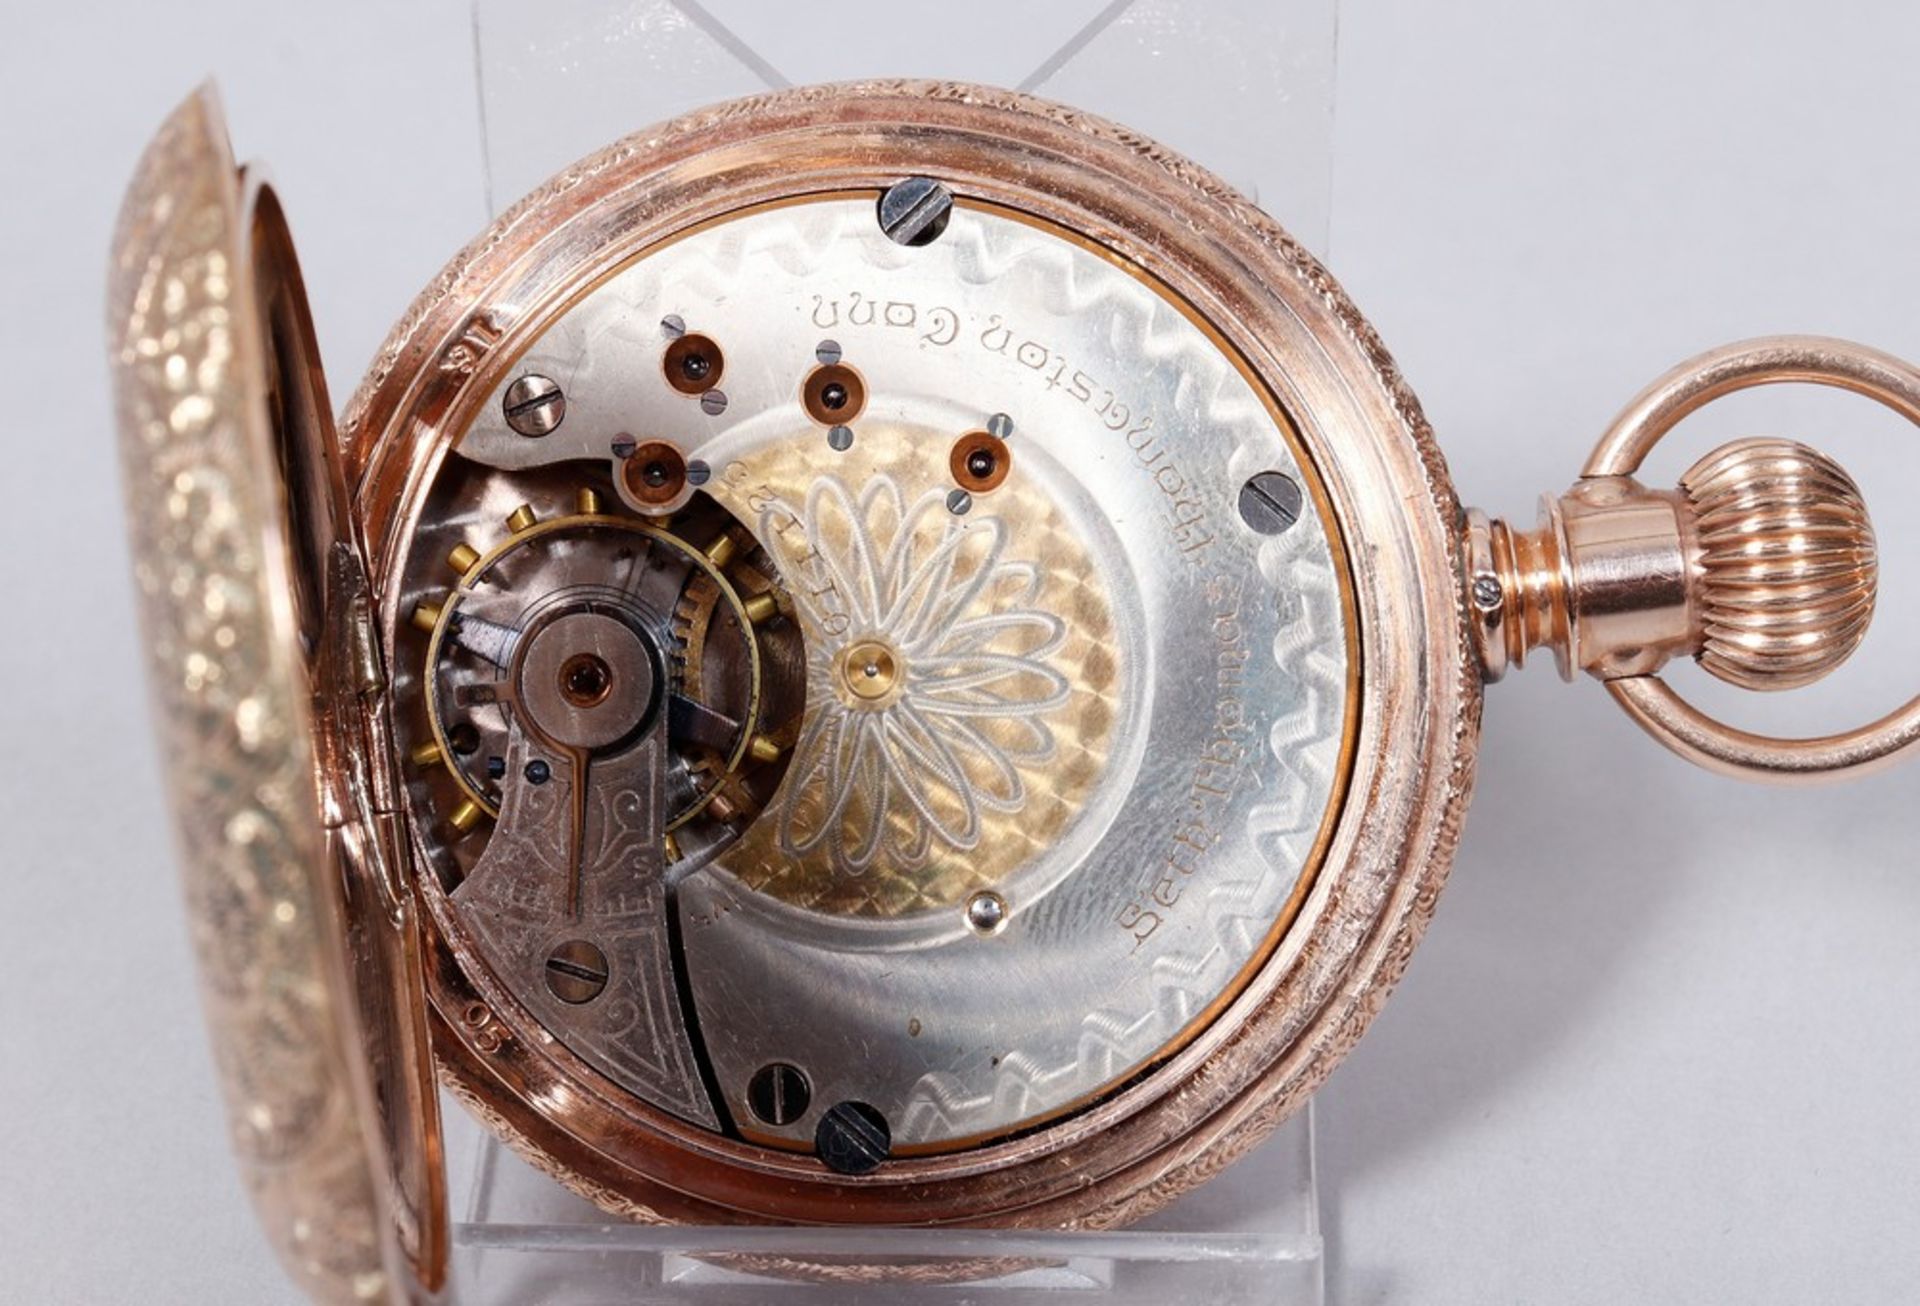 Very rare American pocket watch from 1894, Seth Thomas, Thomaston, Conn., made of 585 gold - Image 6 of 8